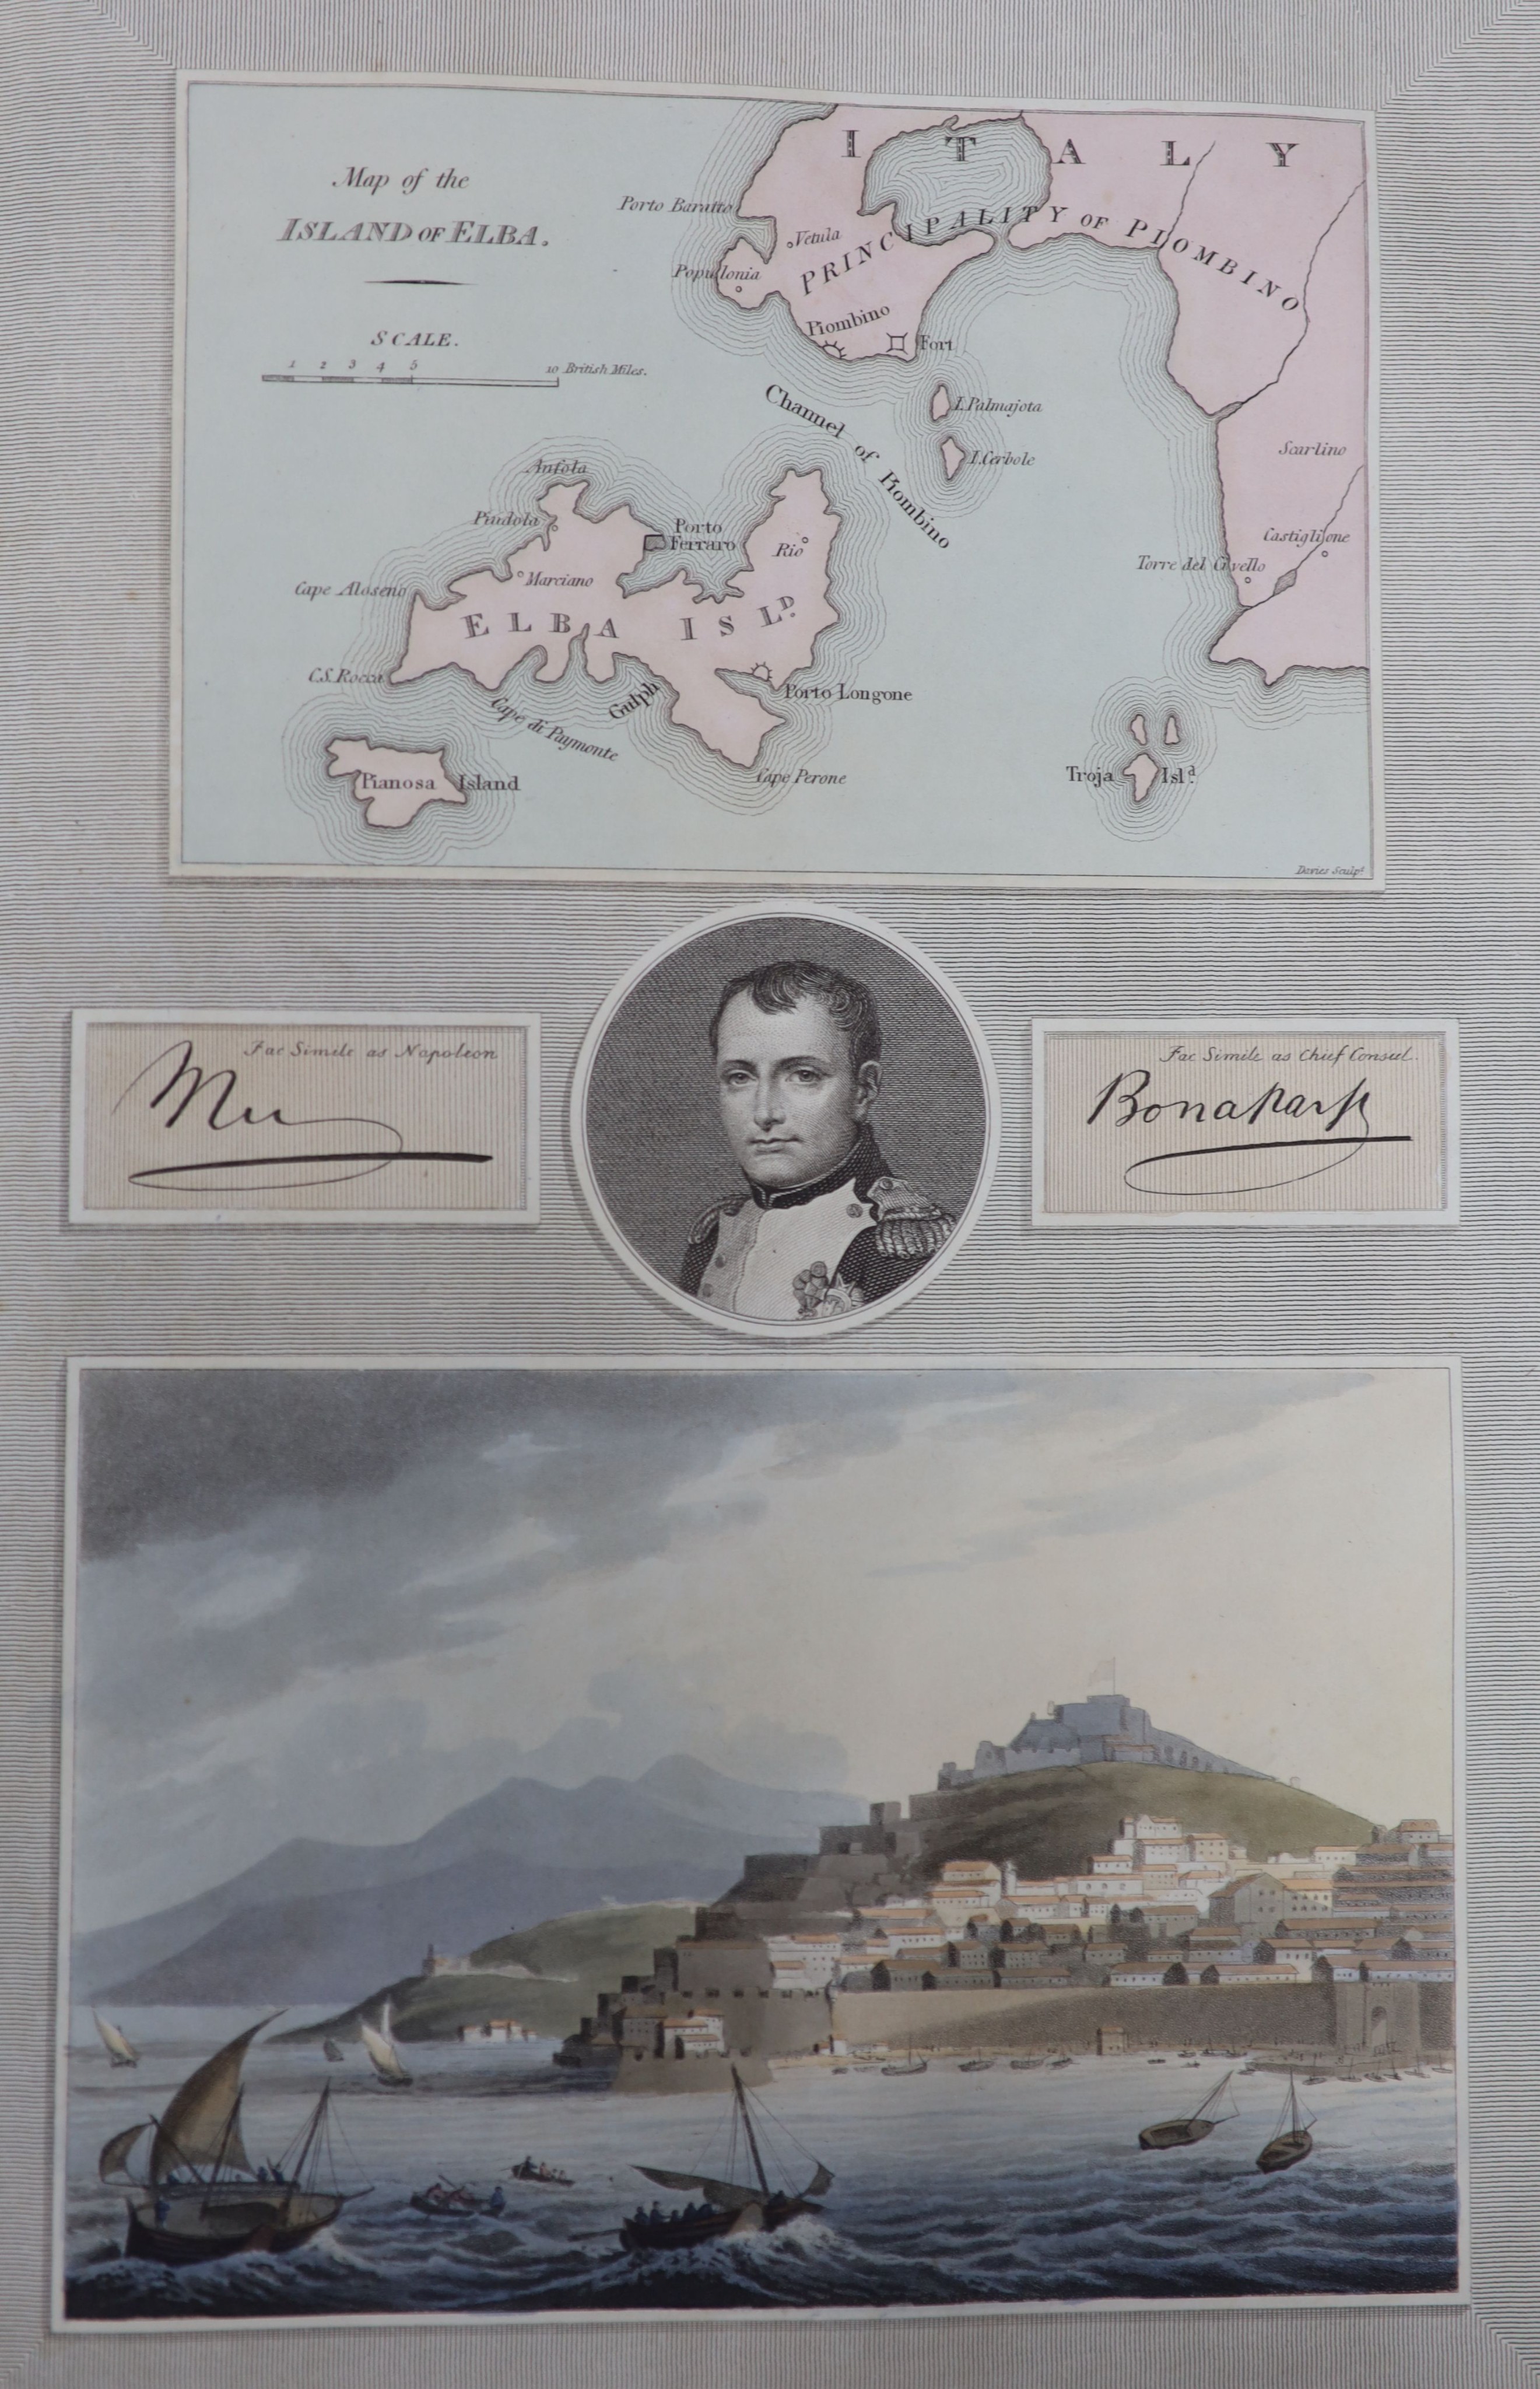 Bowyer, Robert - An Illustrated Record of Important Events in the Annals of Europe, first edition, folio, rebound quarter blue morocco, with 21 plates, T. Bensley, for Robert Bowyer, London, 1815